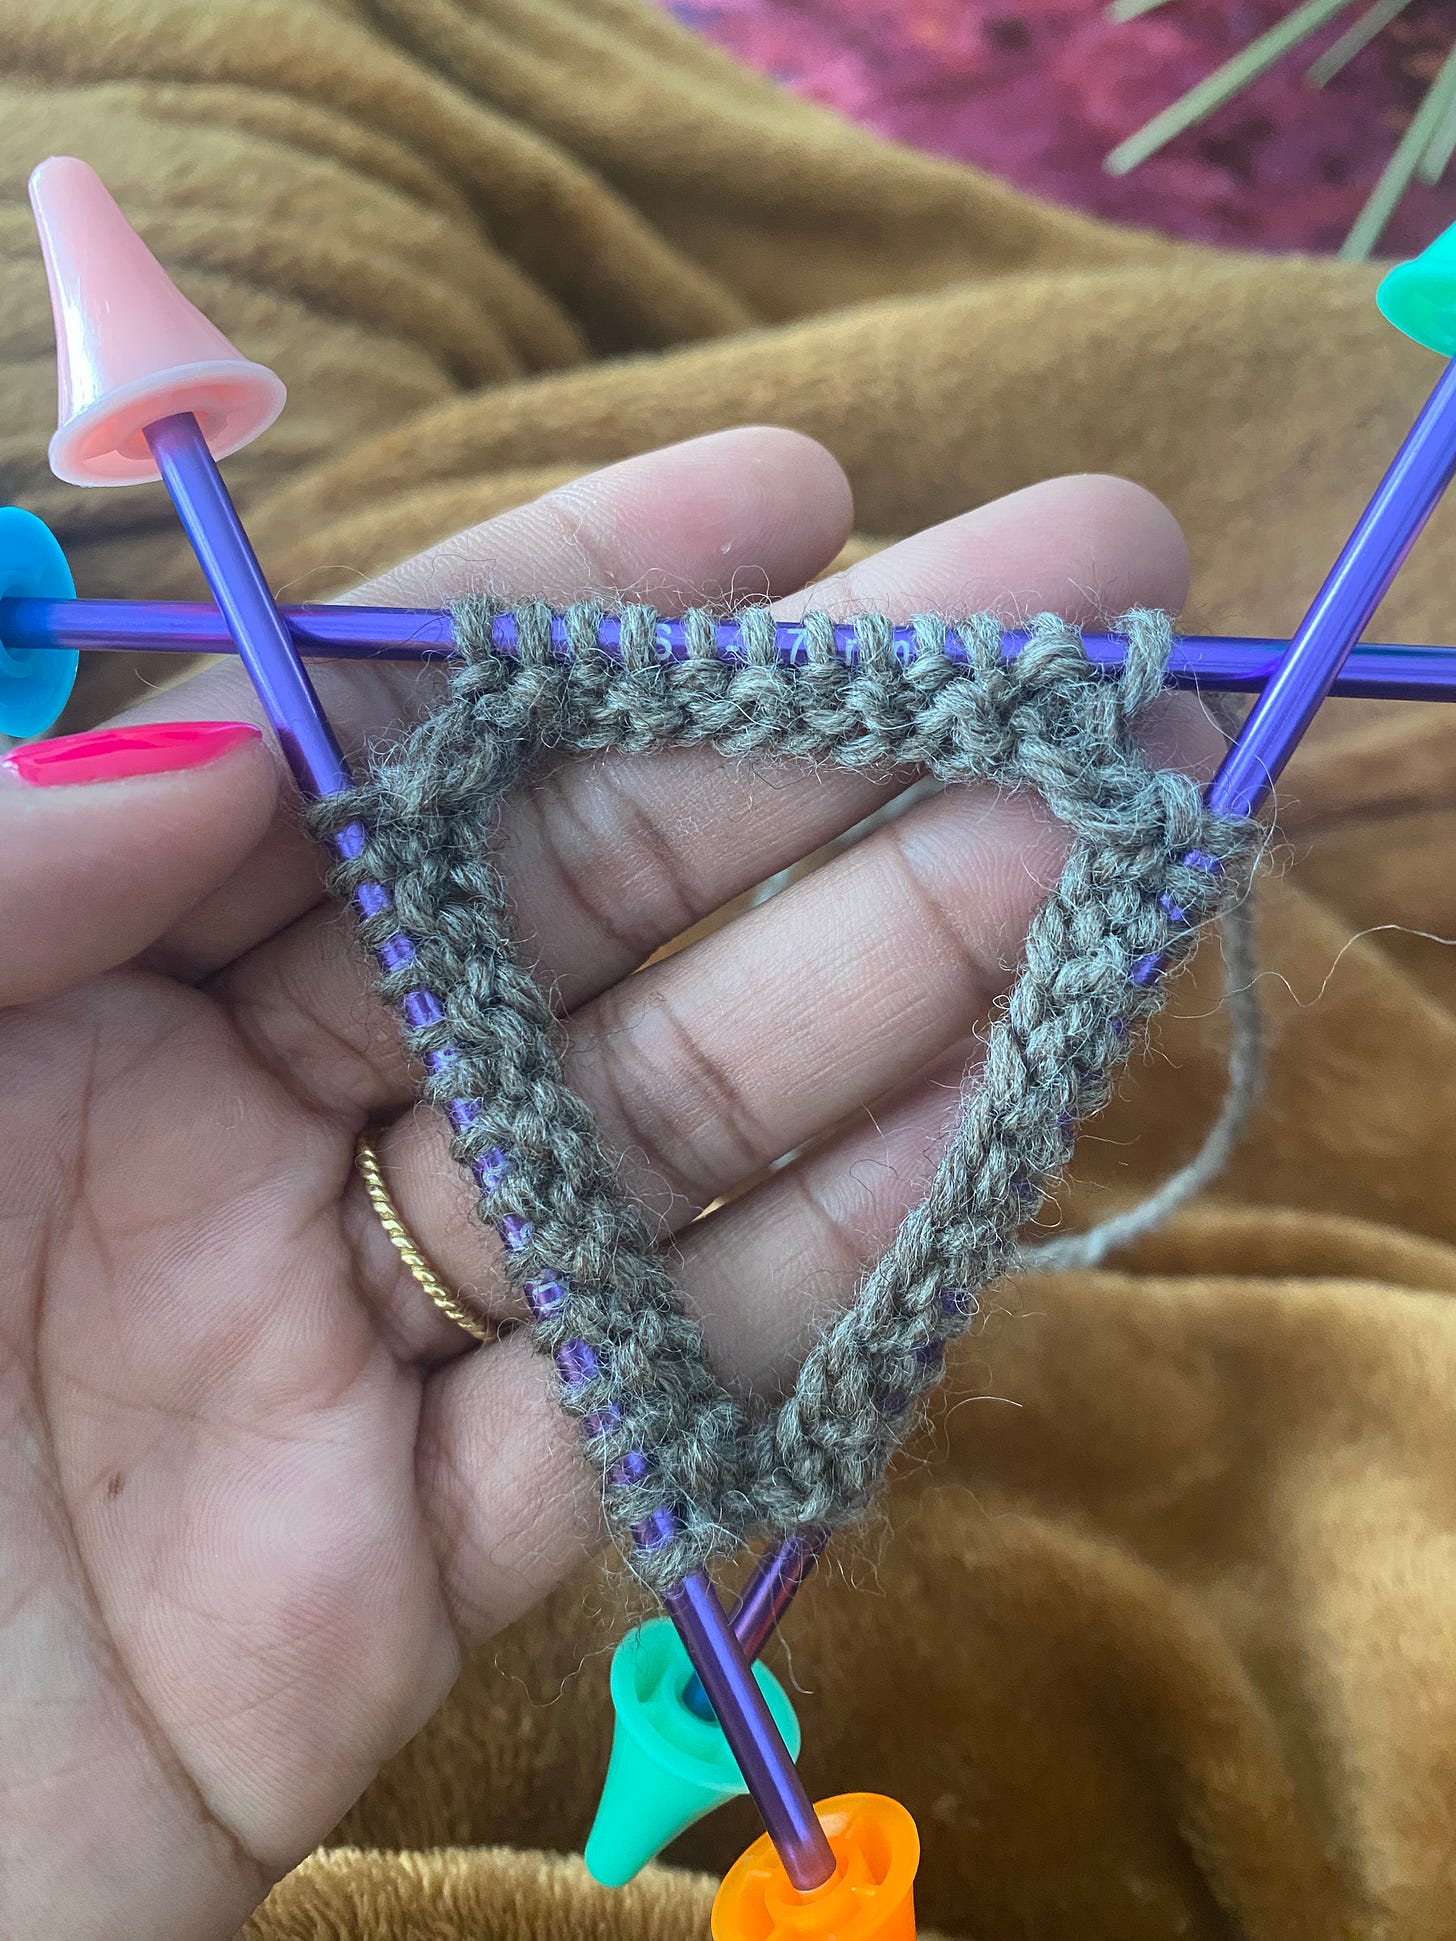 Three double point needs with knit stitches in the round